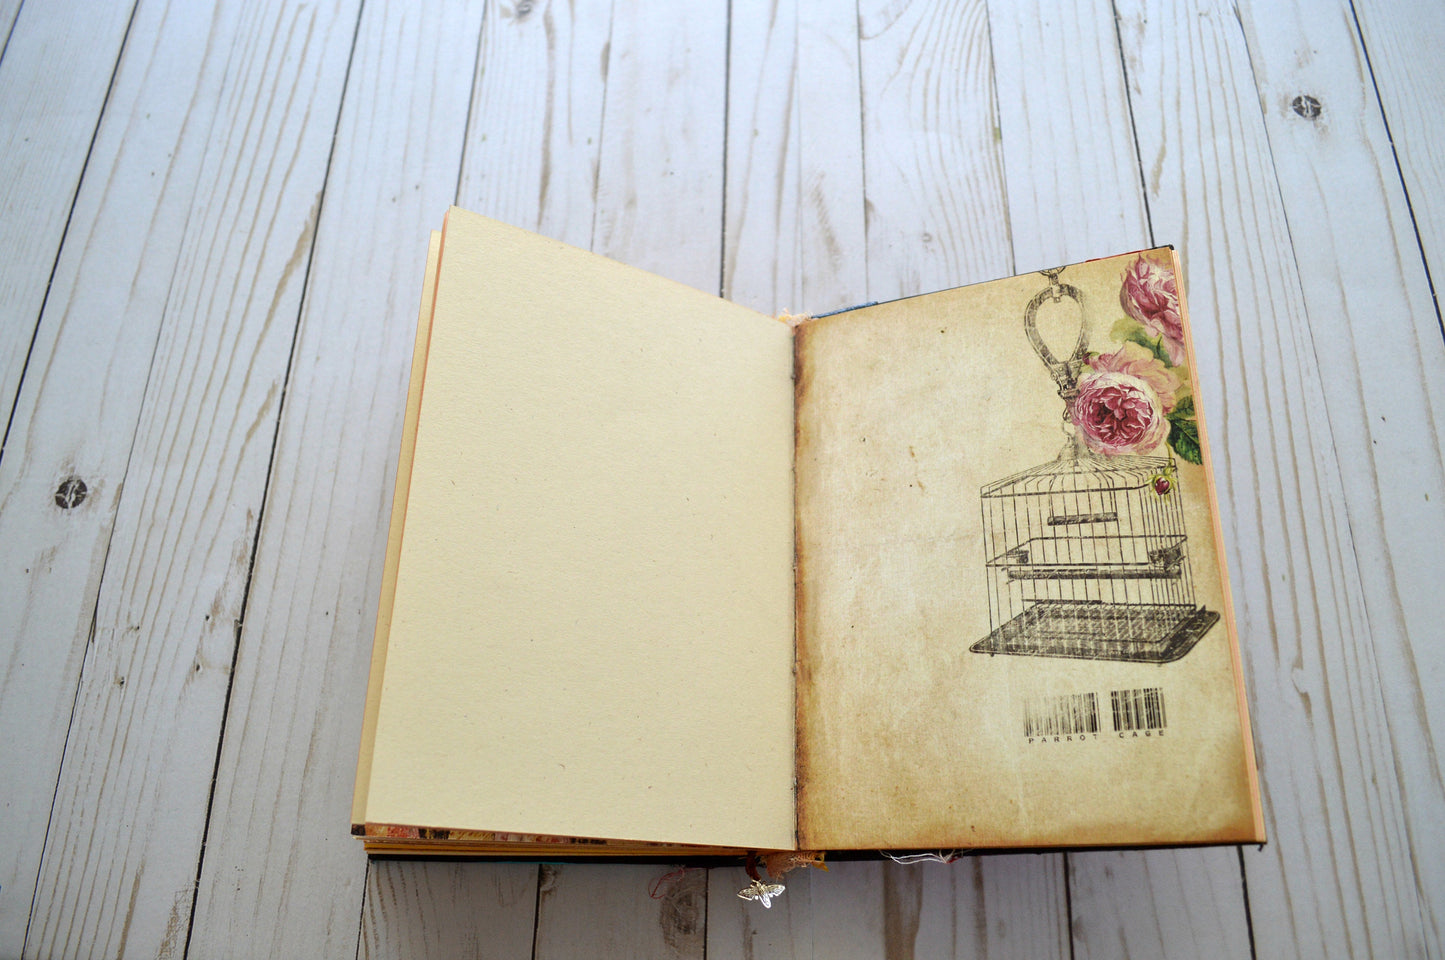 Junk Journal Diary Book with decorated pages, Gypsy Soul Memory Keeping Artist Notebook Gift, Travel Scrapbook Album, Boho Wedding GuestBook